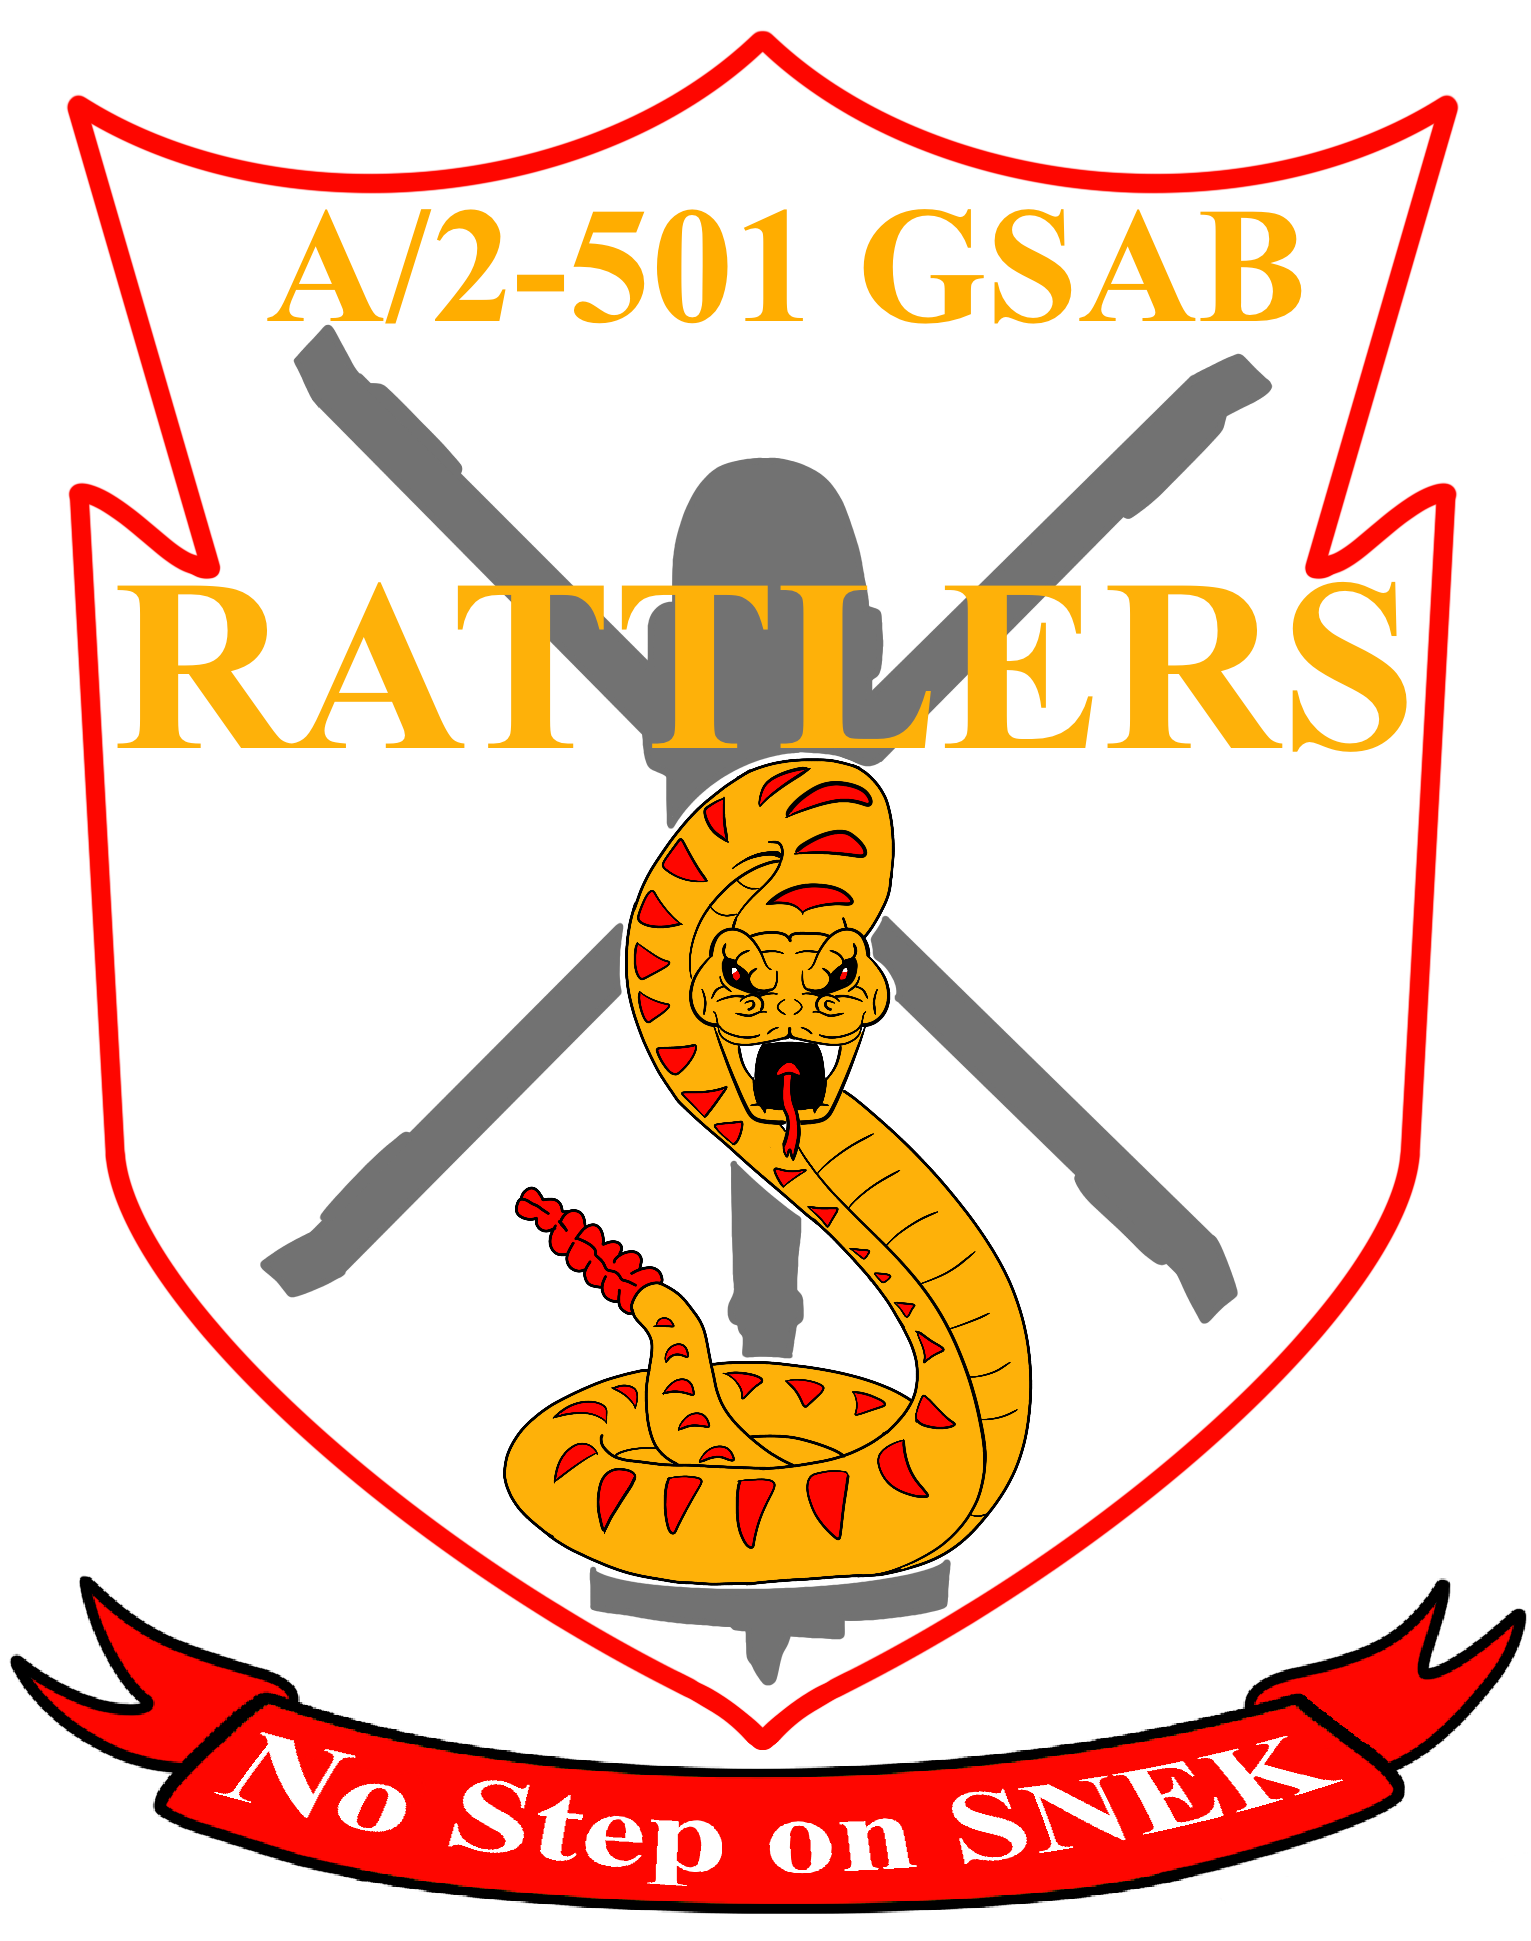 A Co, 2-501 GSAB "Rattlers"